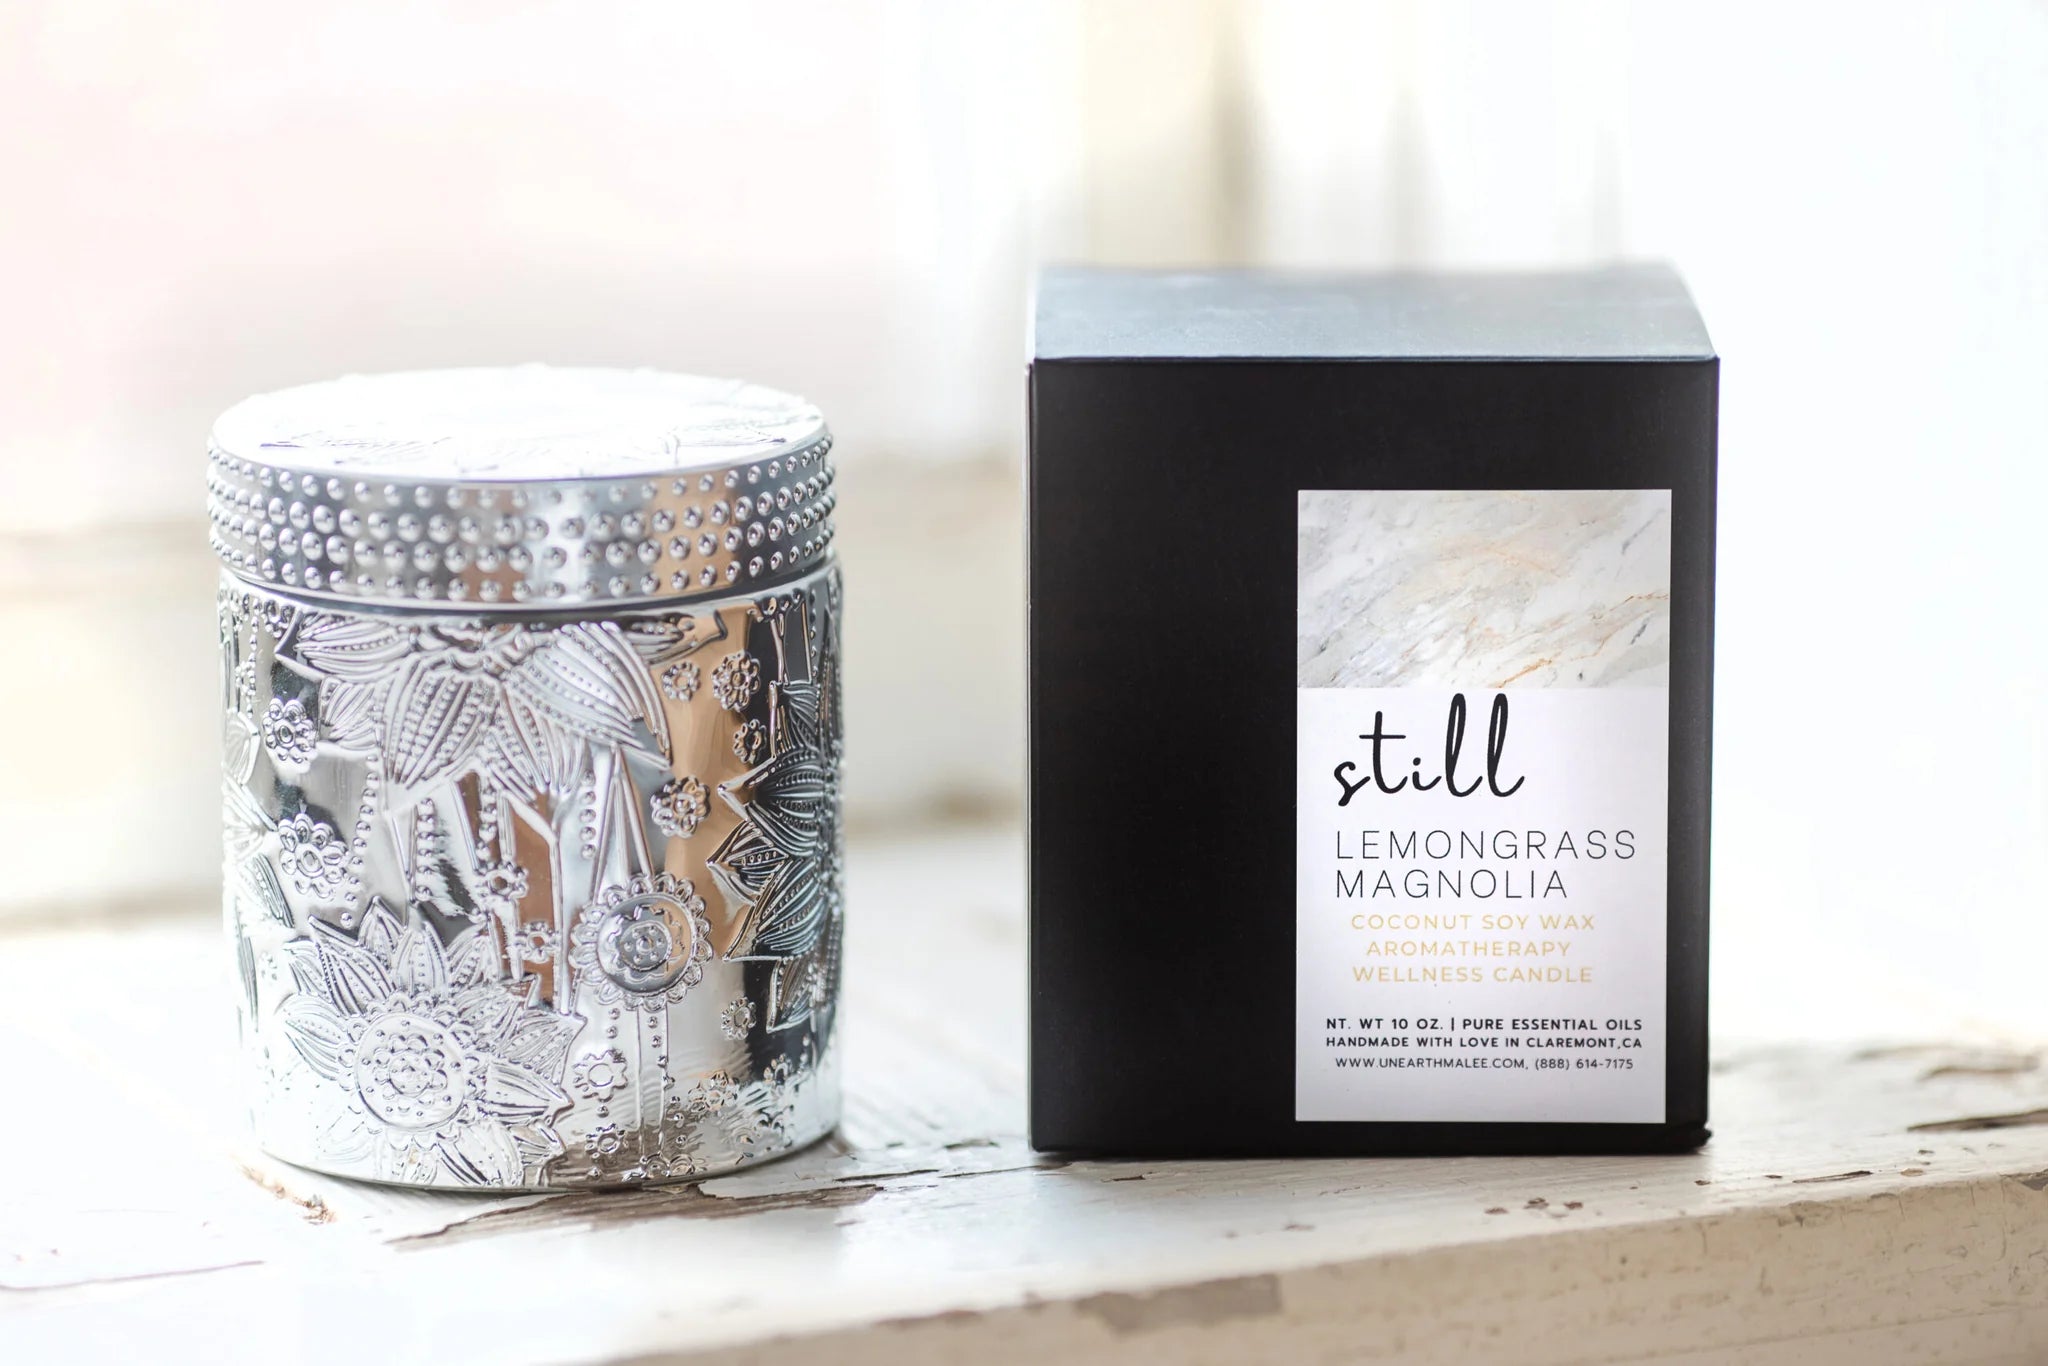 Unearth Malee | Thai Ginger Mint Lotus Aromatherapy Candle